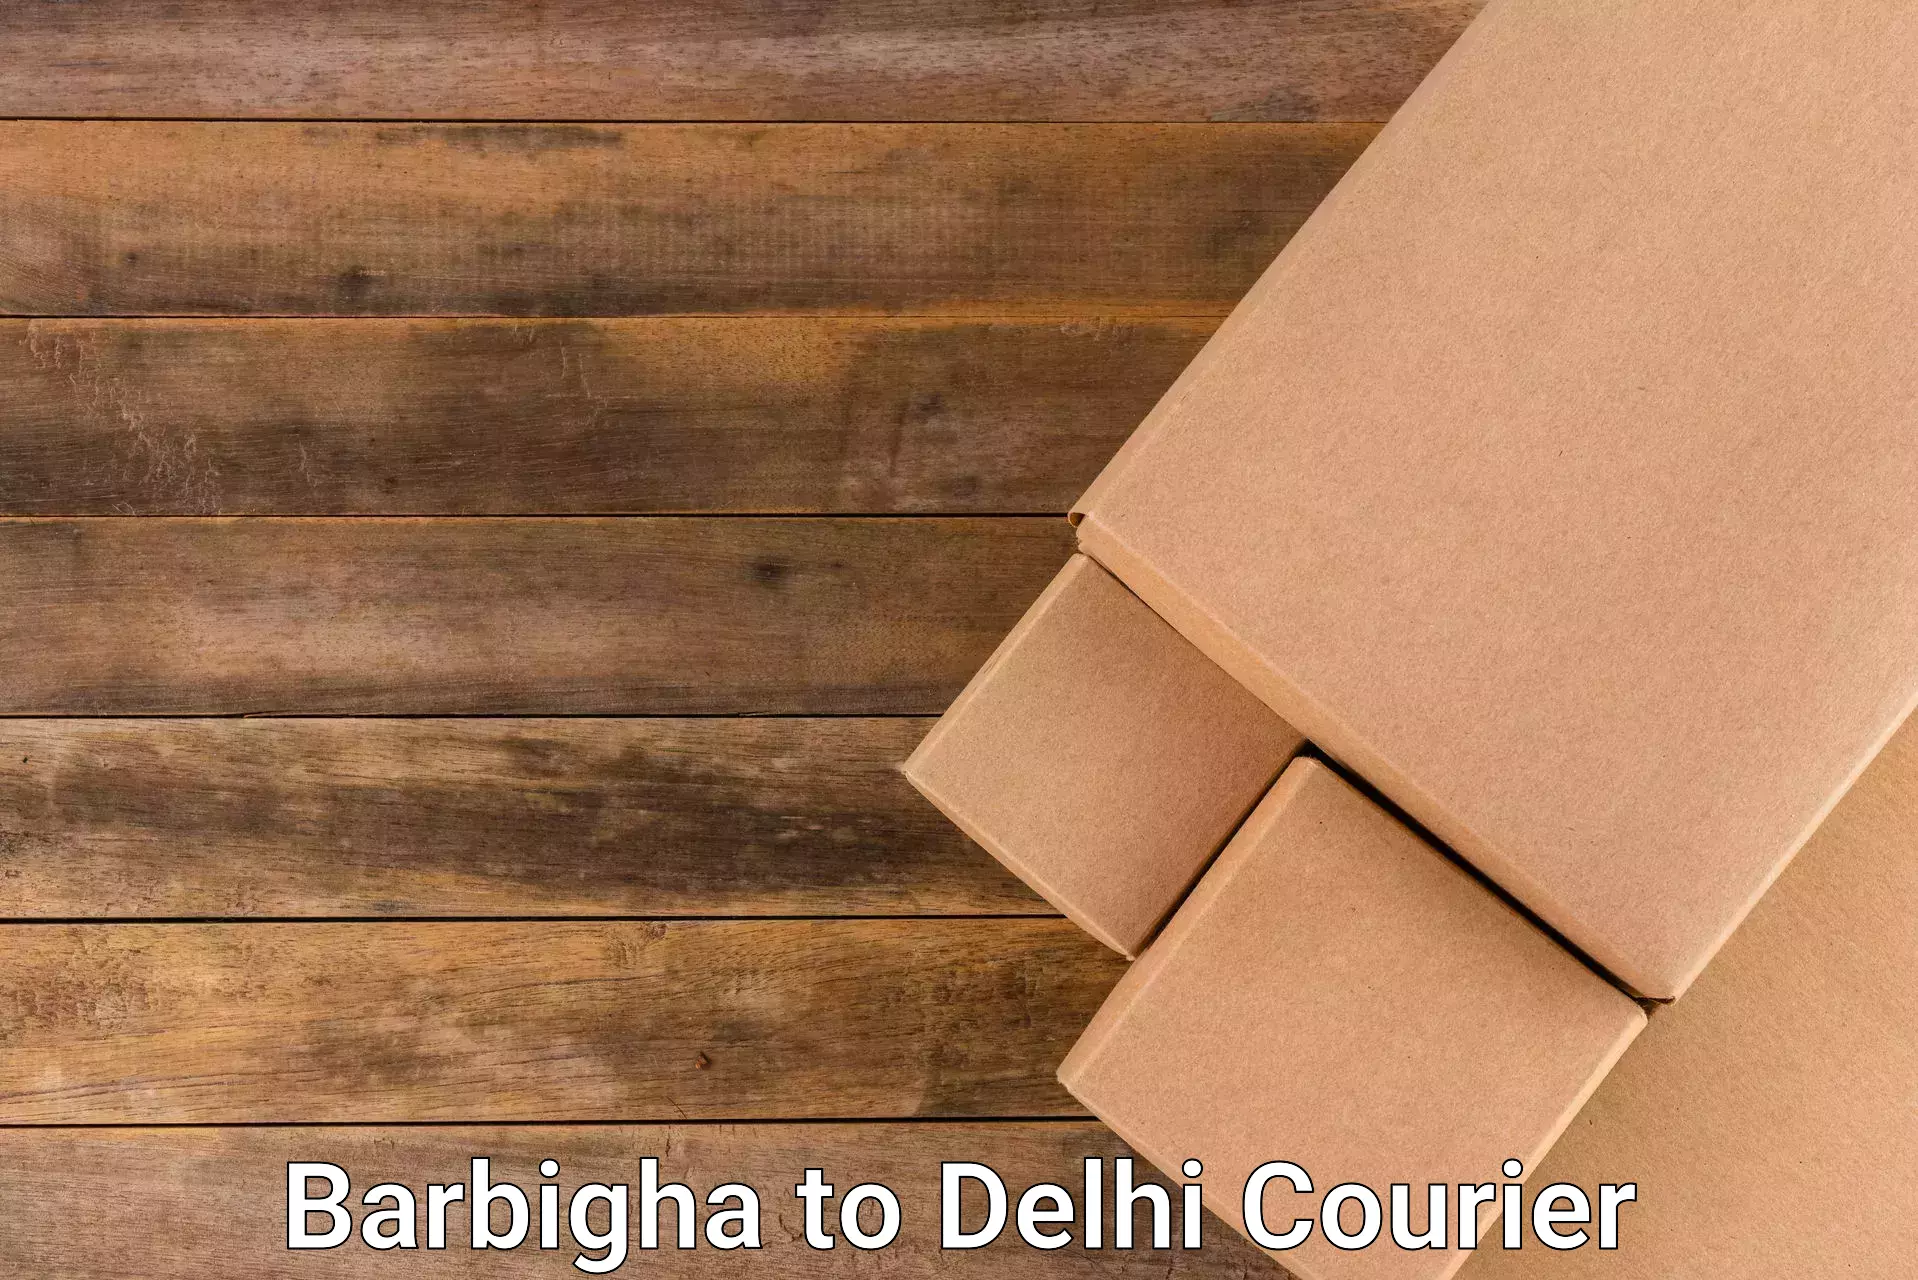 Courier service partnerships Barbigha to Jhilmil